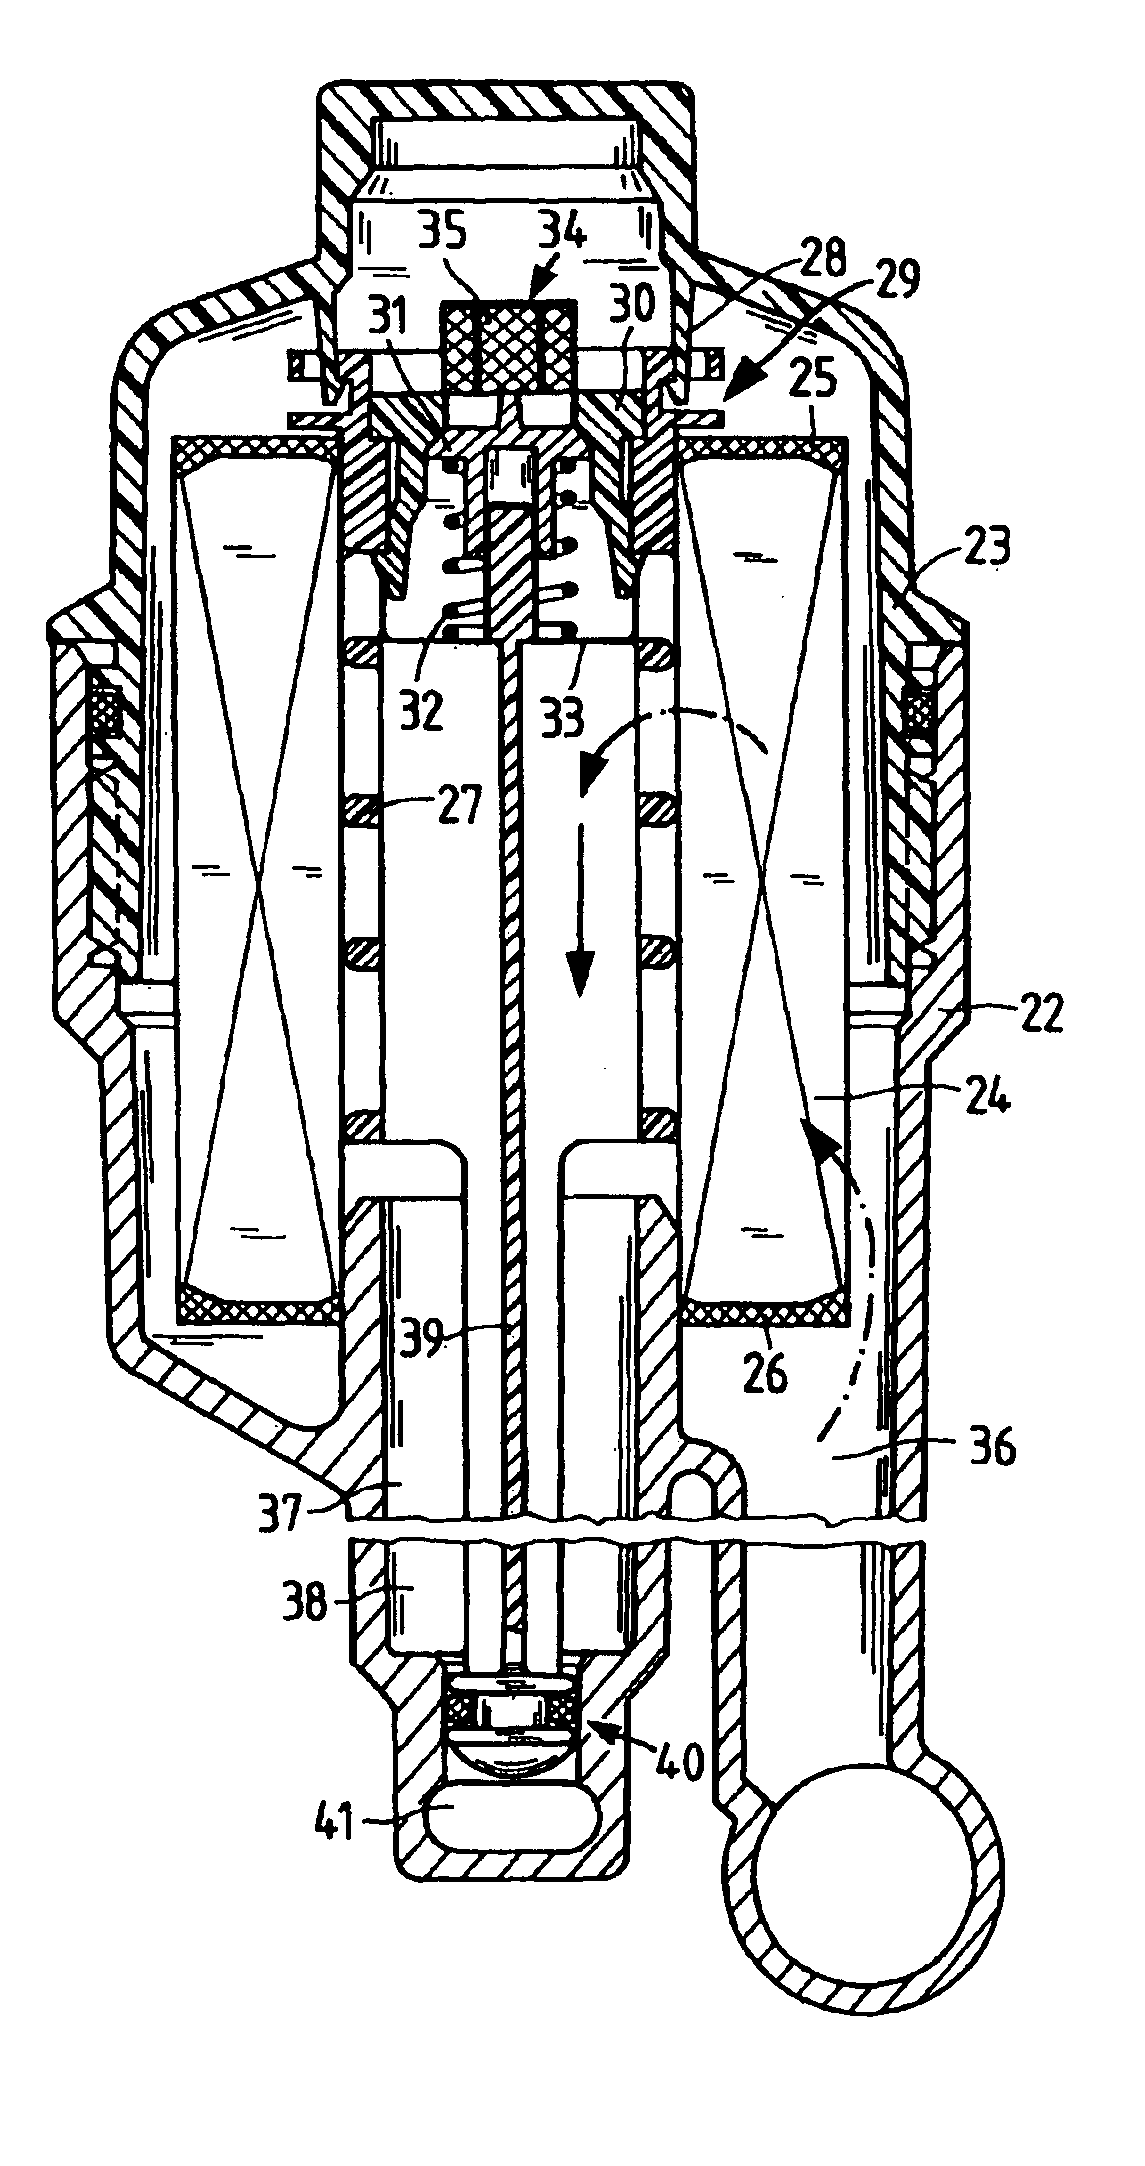 Valve suitable for use in an oil circuit of an internal combustion engine